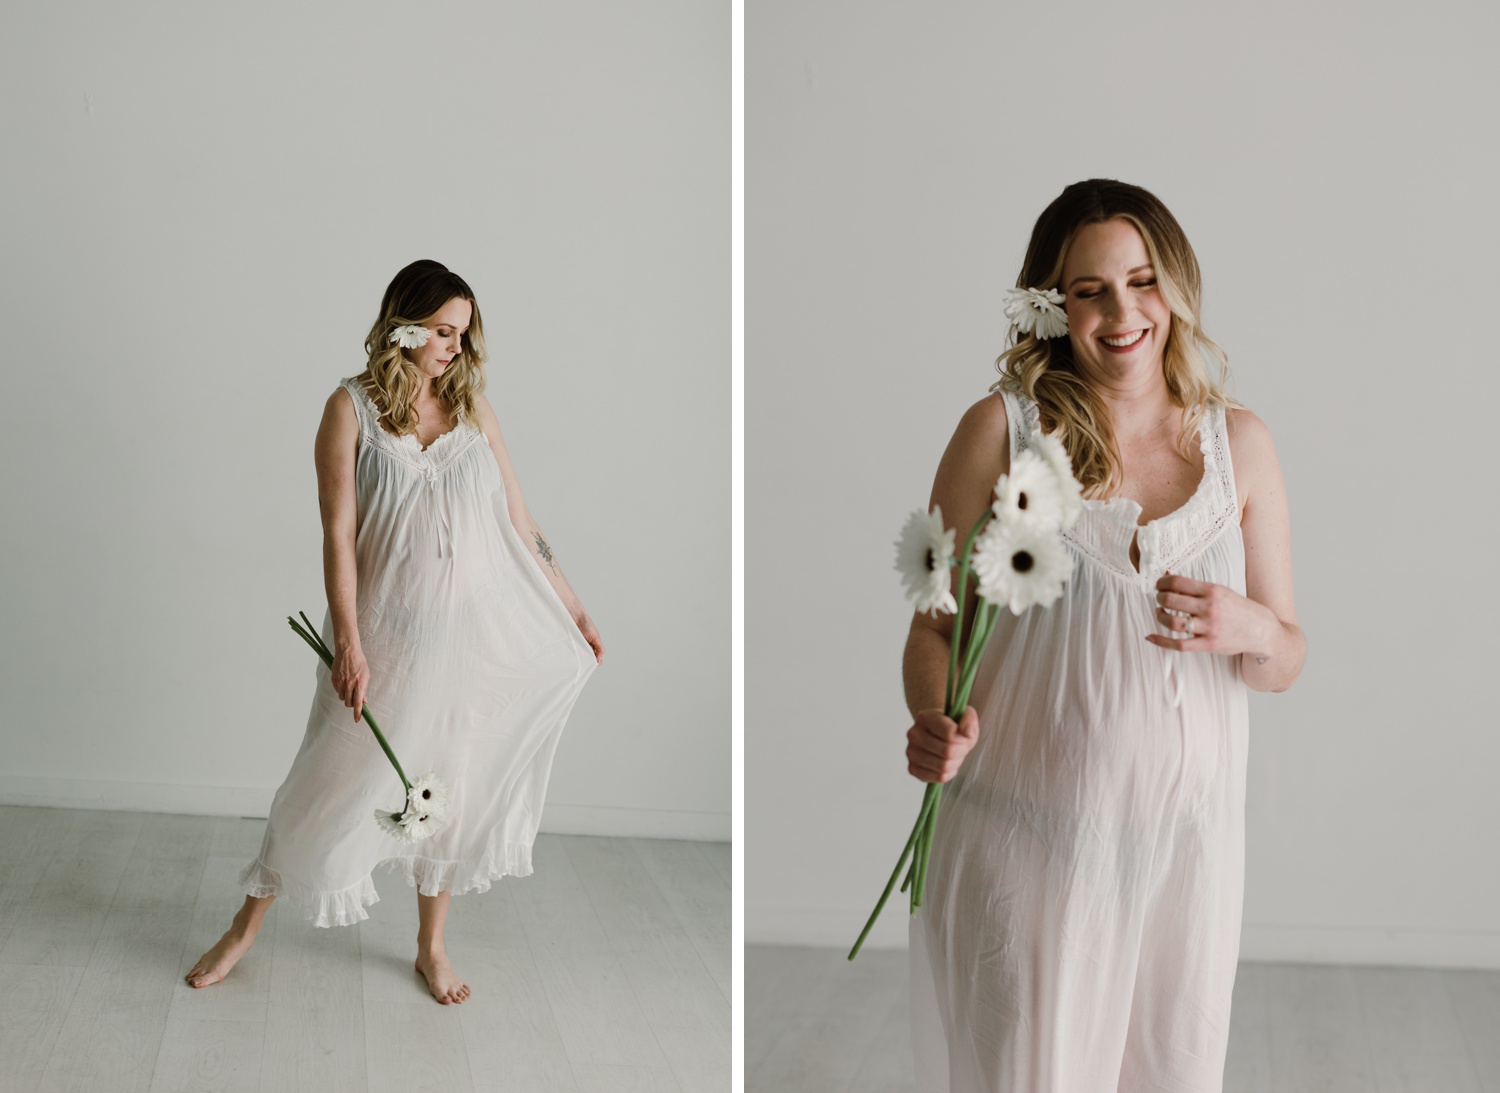 Expectant mom wearing the Doen Alessia Nightgown for a maternity session